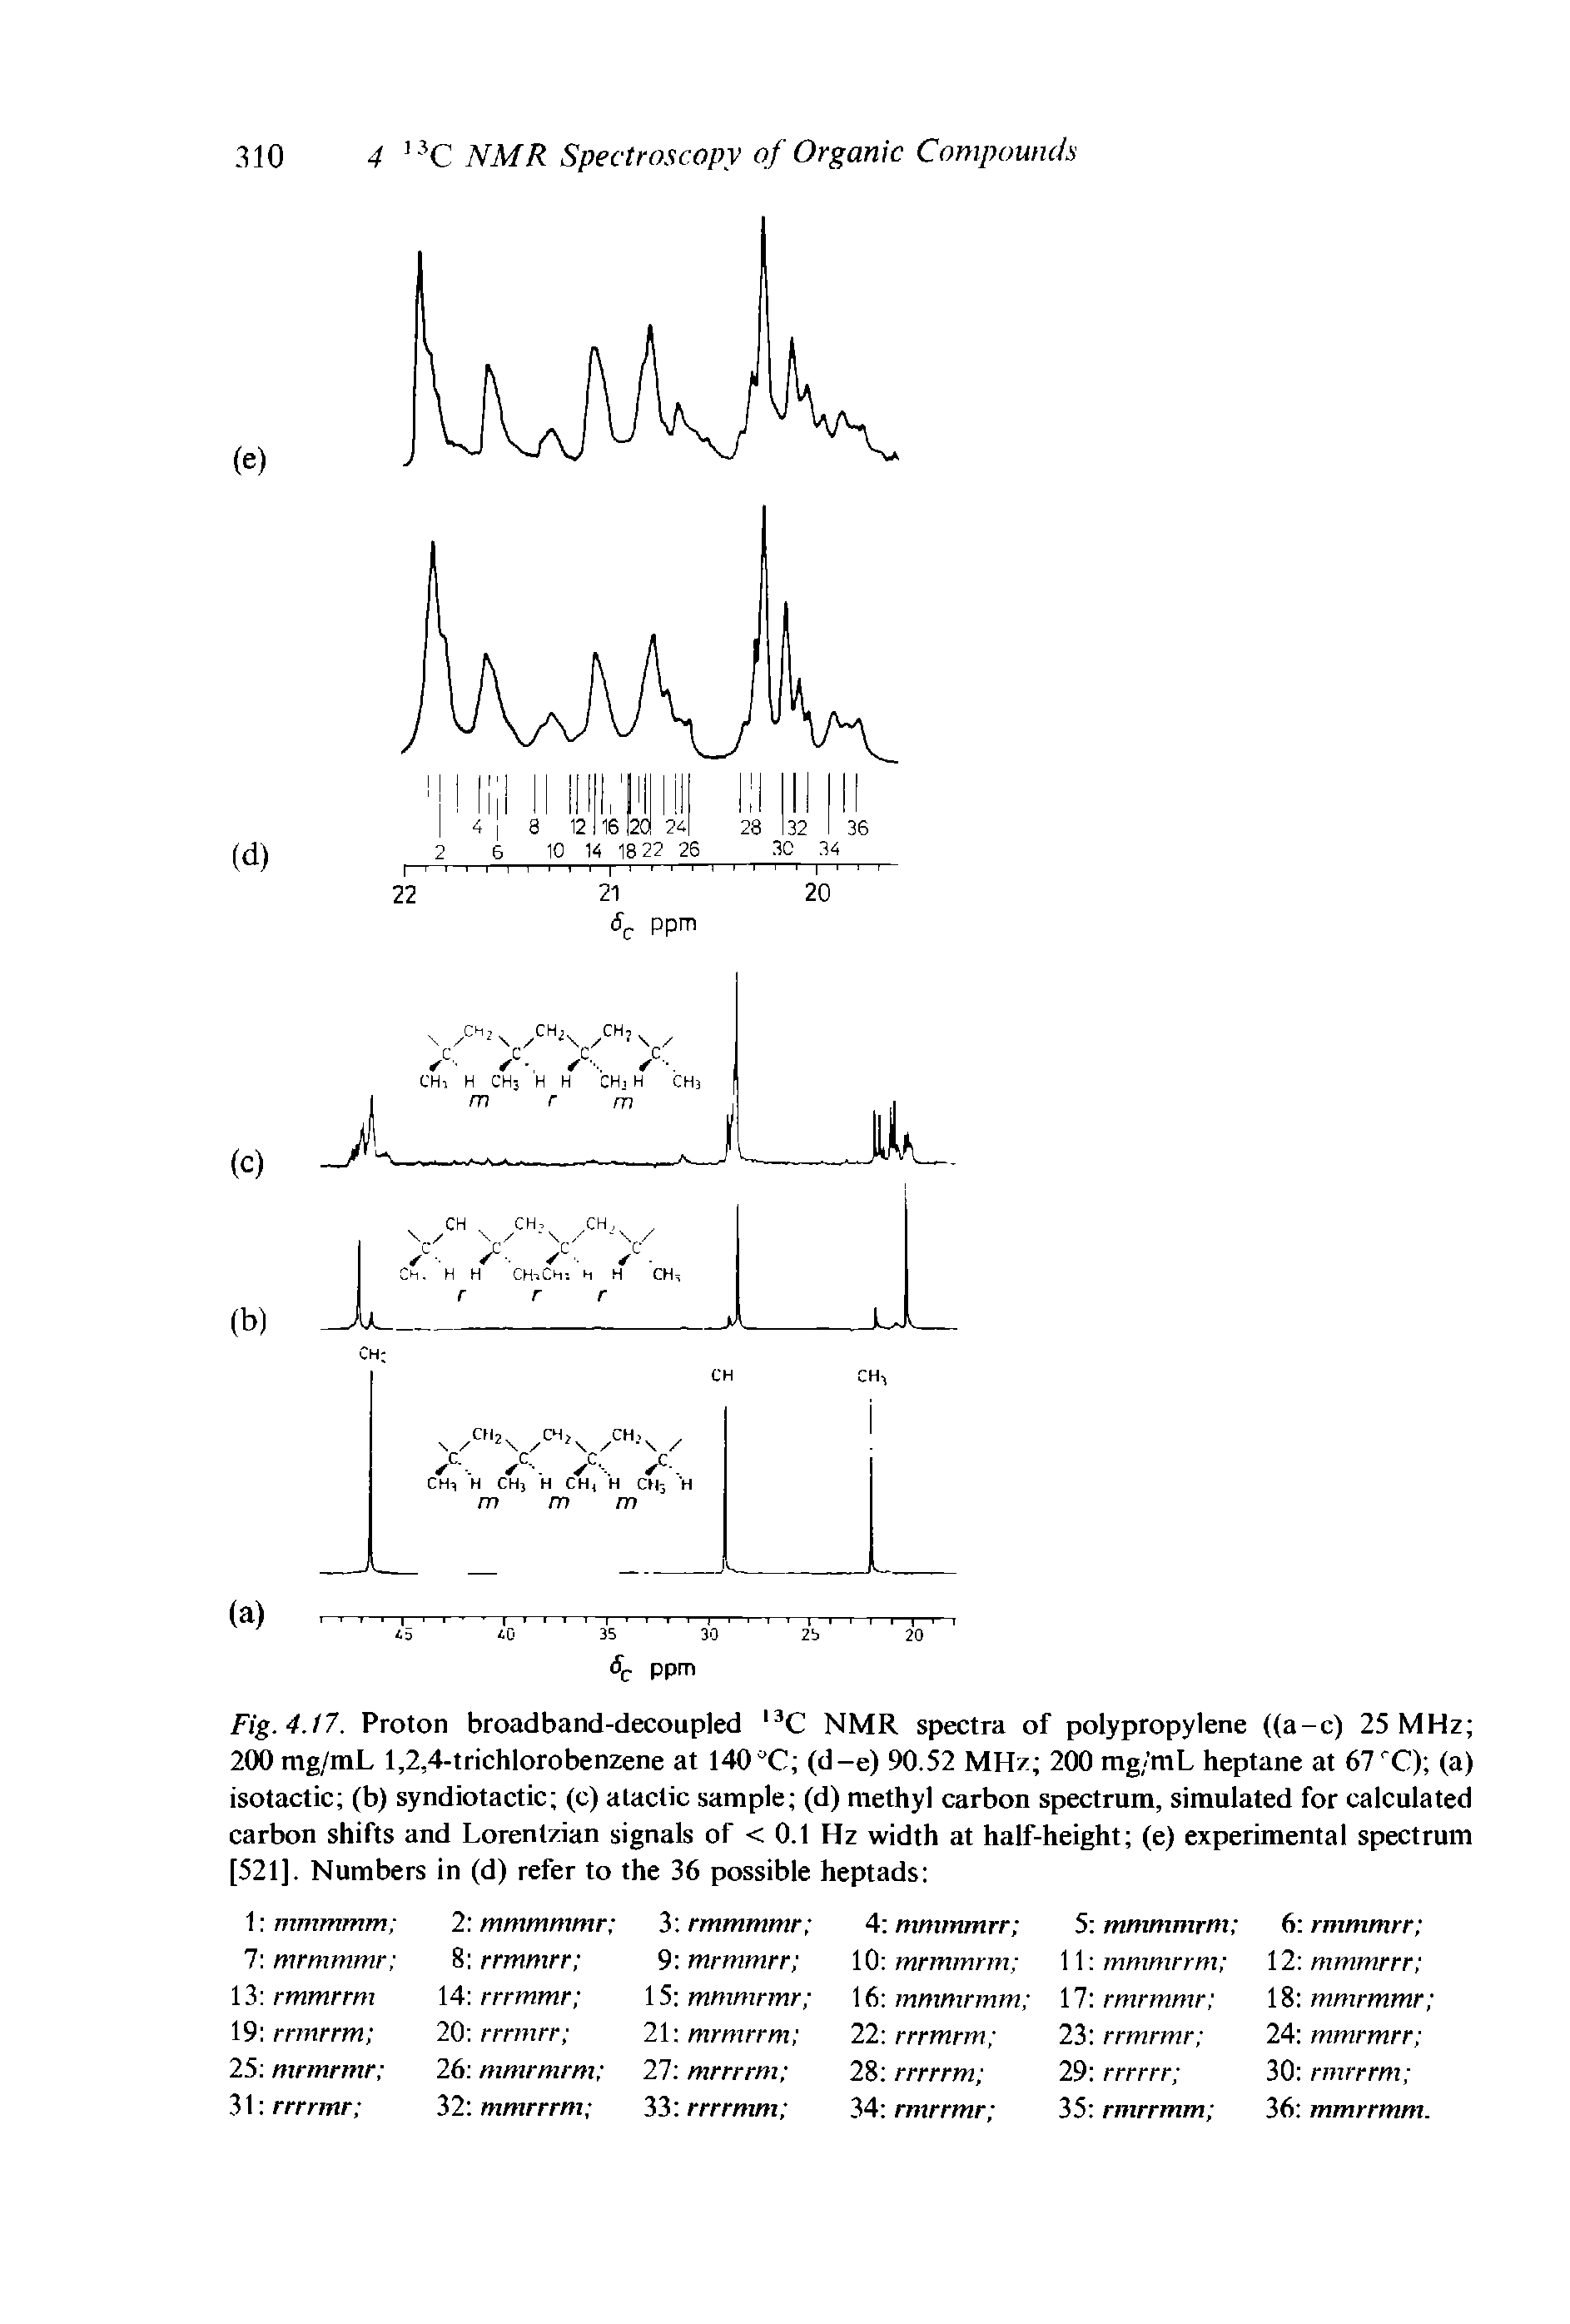 Fig.4.17. Proton broadband-decoupled l3C NMR spectra of polypropylene ((a-c) 25 MHz 200 mg/mL 1,2,4-trichlorobenzene at 140 JC (d-e) 90.52 MHz 200 mg/mL heptane at 67 X) (a) isotactic (b) syndiotactic (c) atactic sample (d) methyl carbon spectrum, simulated for calculated carbon shifts and Lorentzian signals of < 0.1 Hz width at half-height (e) experimental spectrum [521]. Numbers in (d) refer to the 36 possible heptads ...